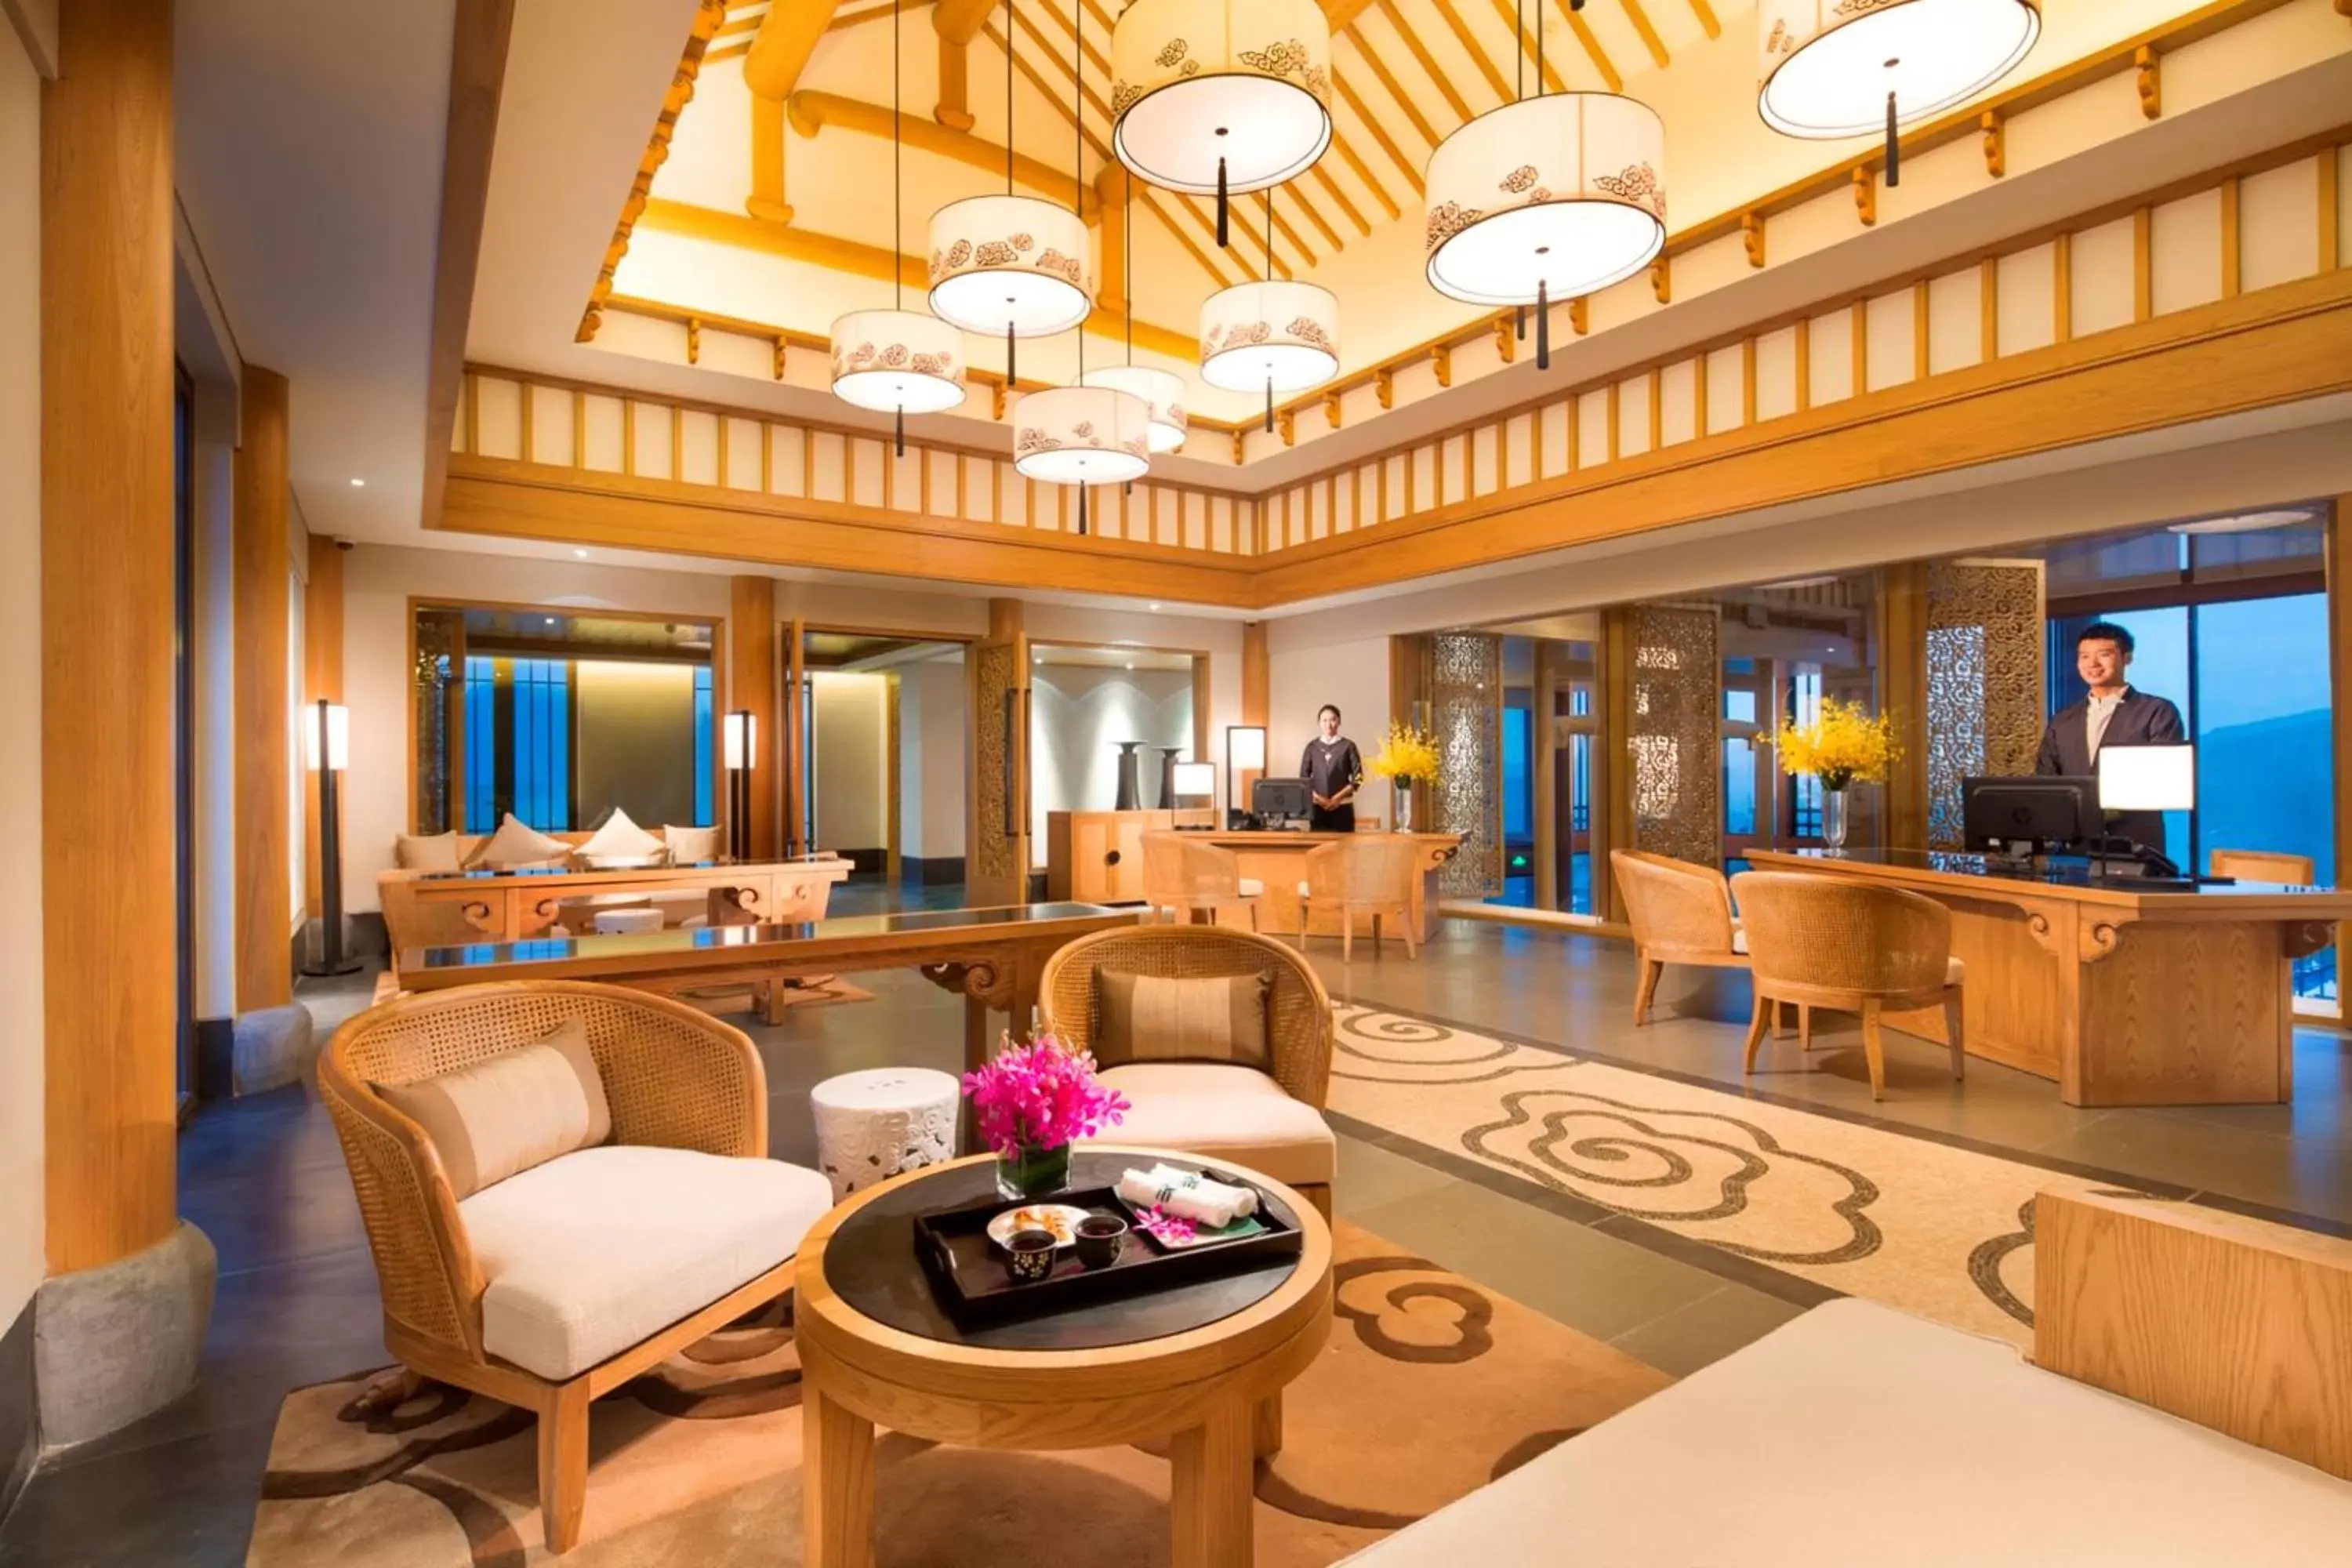 Lobby or reception in Banyan Tree Hotel Huangshan-The Ancient Charm of Huizhou, a Paradise